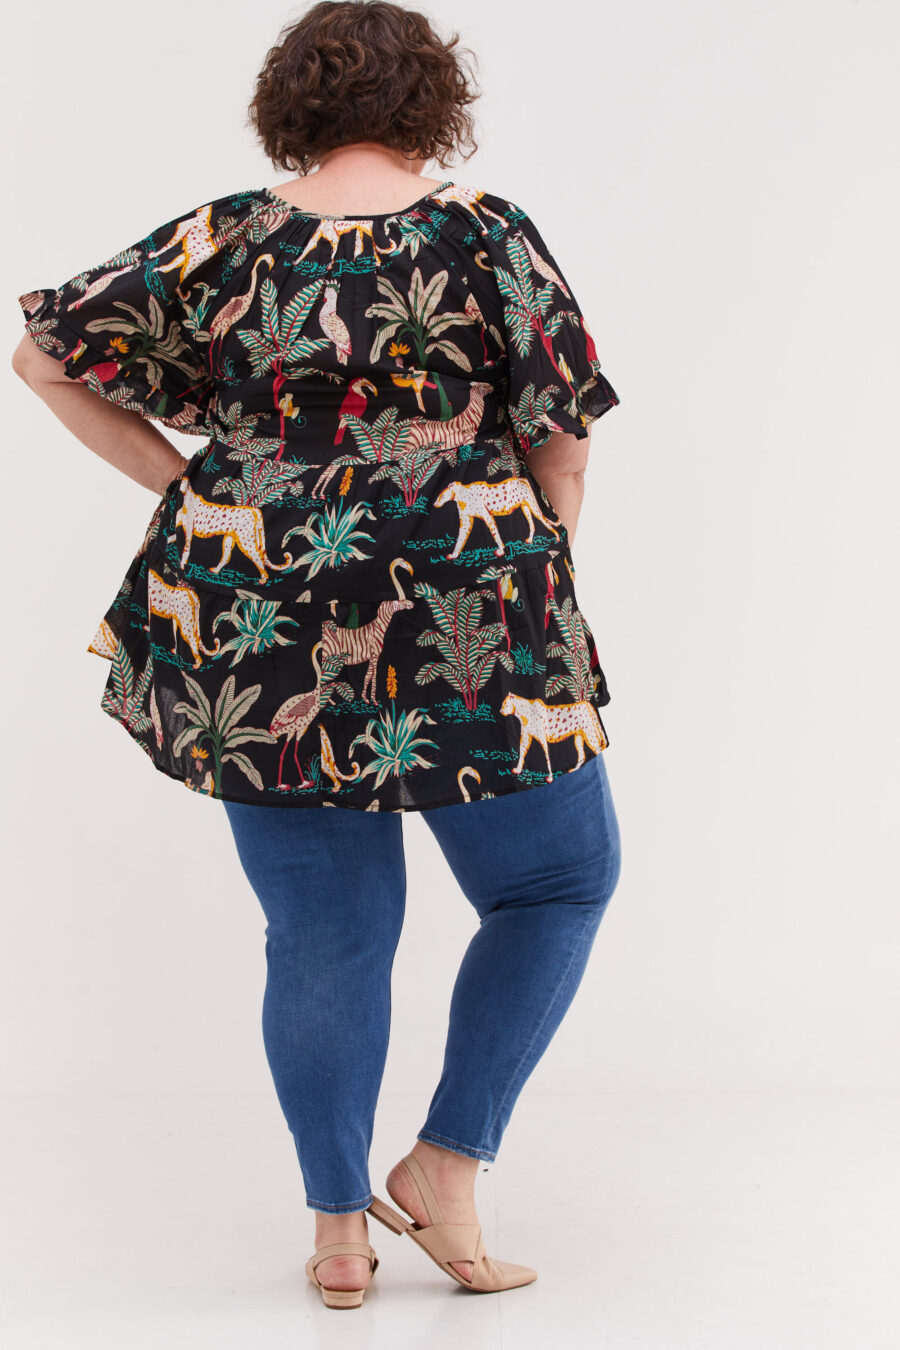 Happy tunic | Oversized flattering tunic – Safary print, black tunic with animals print by comfort zone boutique